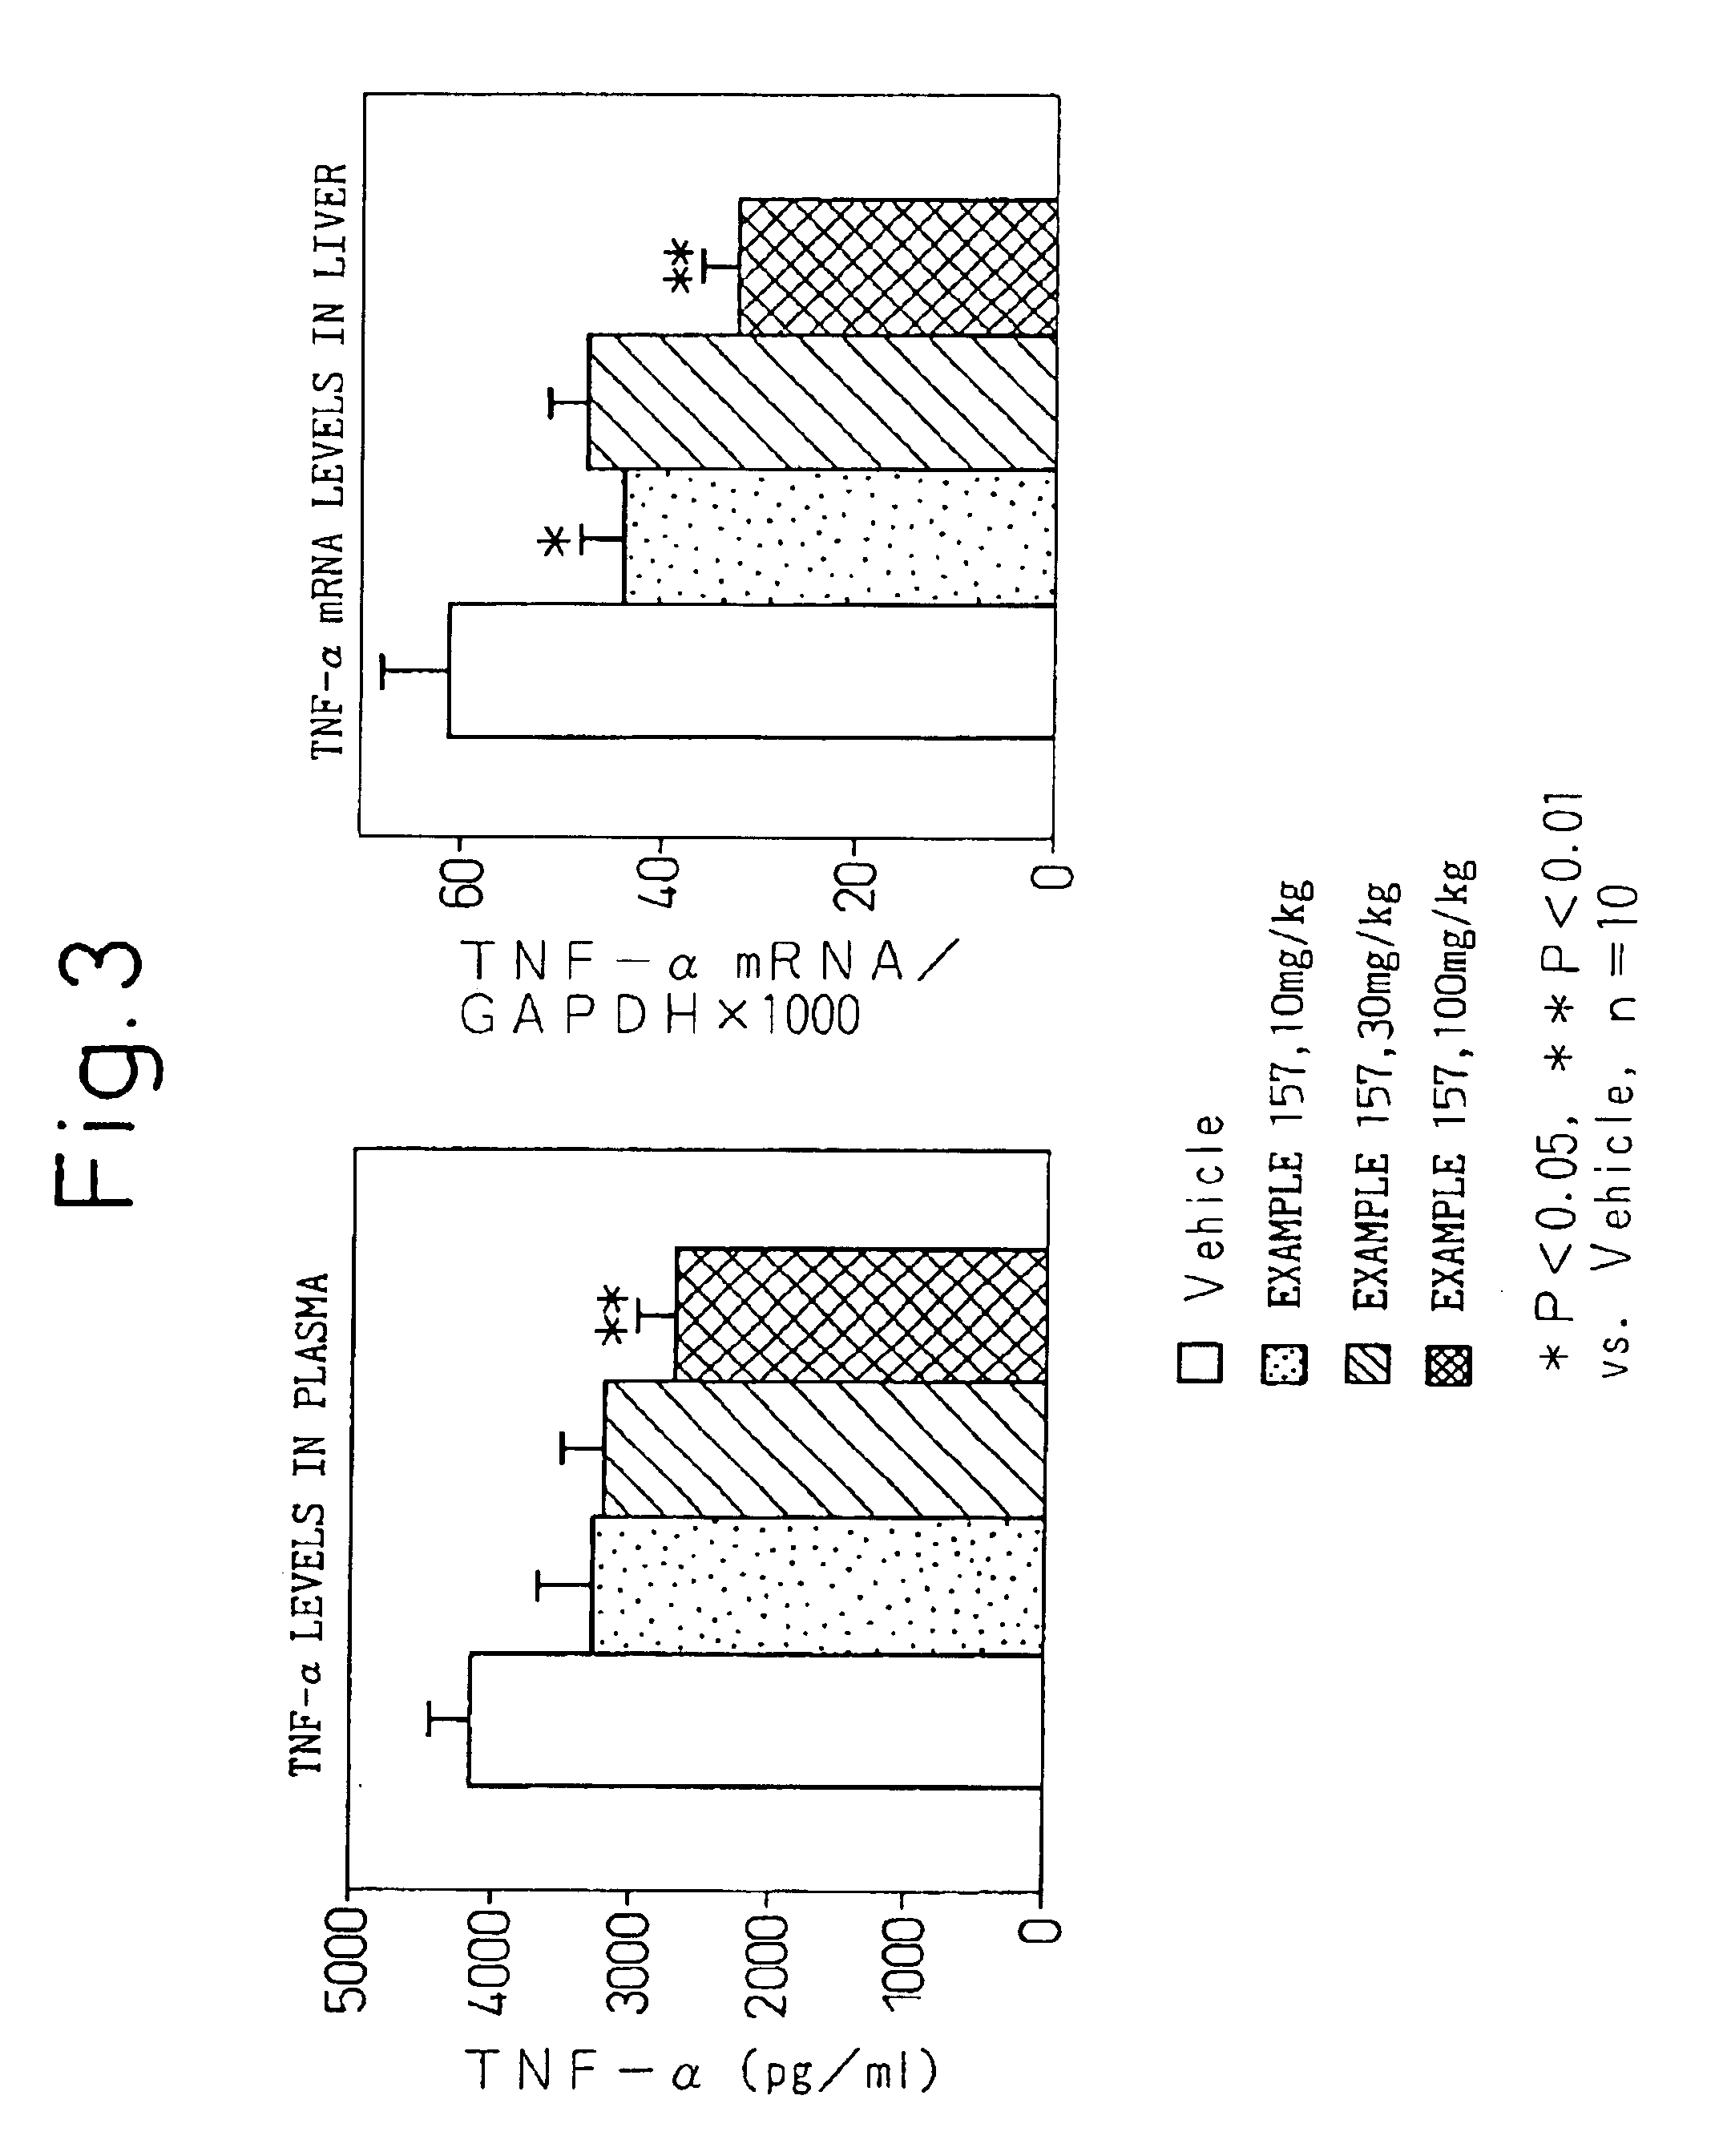 NF-κB inhibitor containing substituted benzoic acid derivative as active ingredient